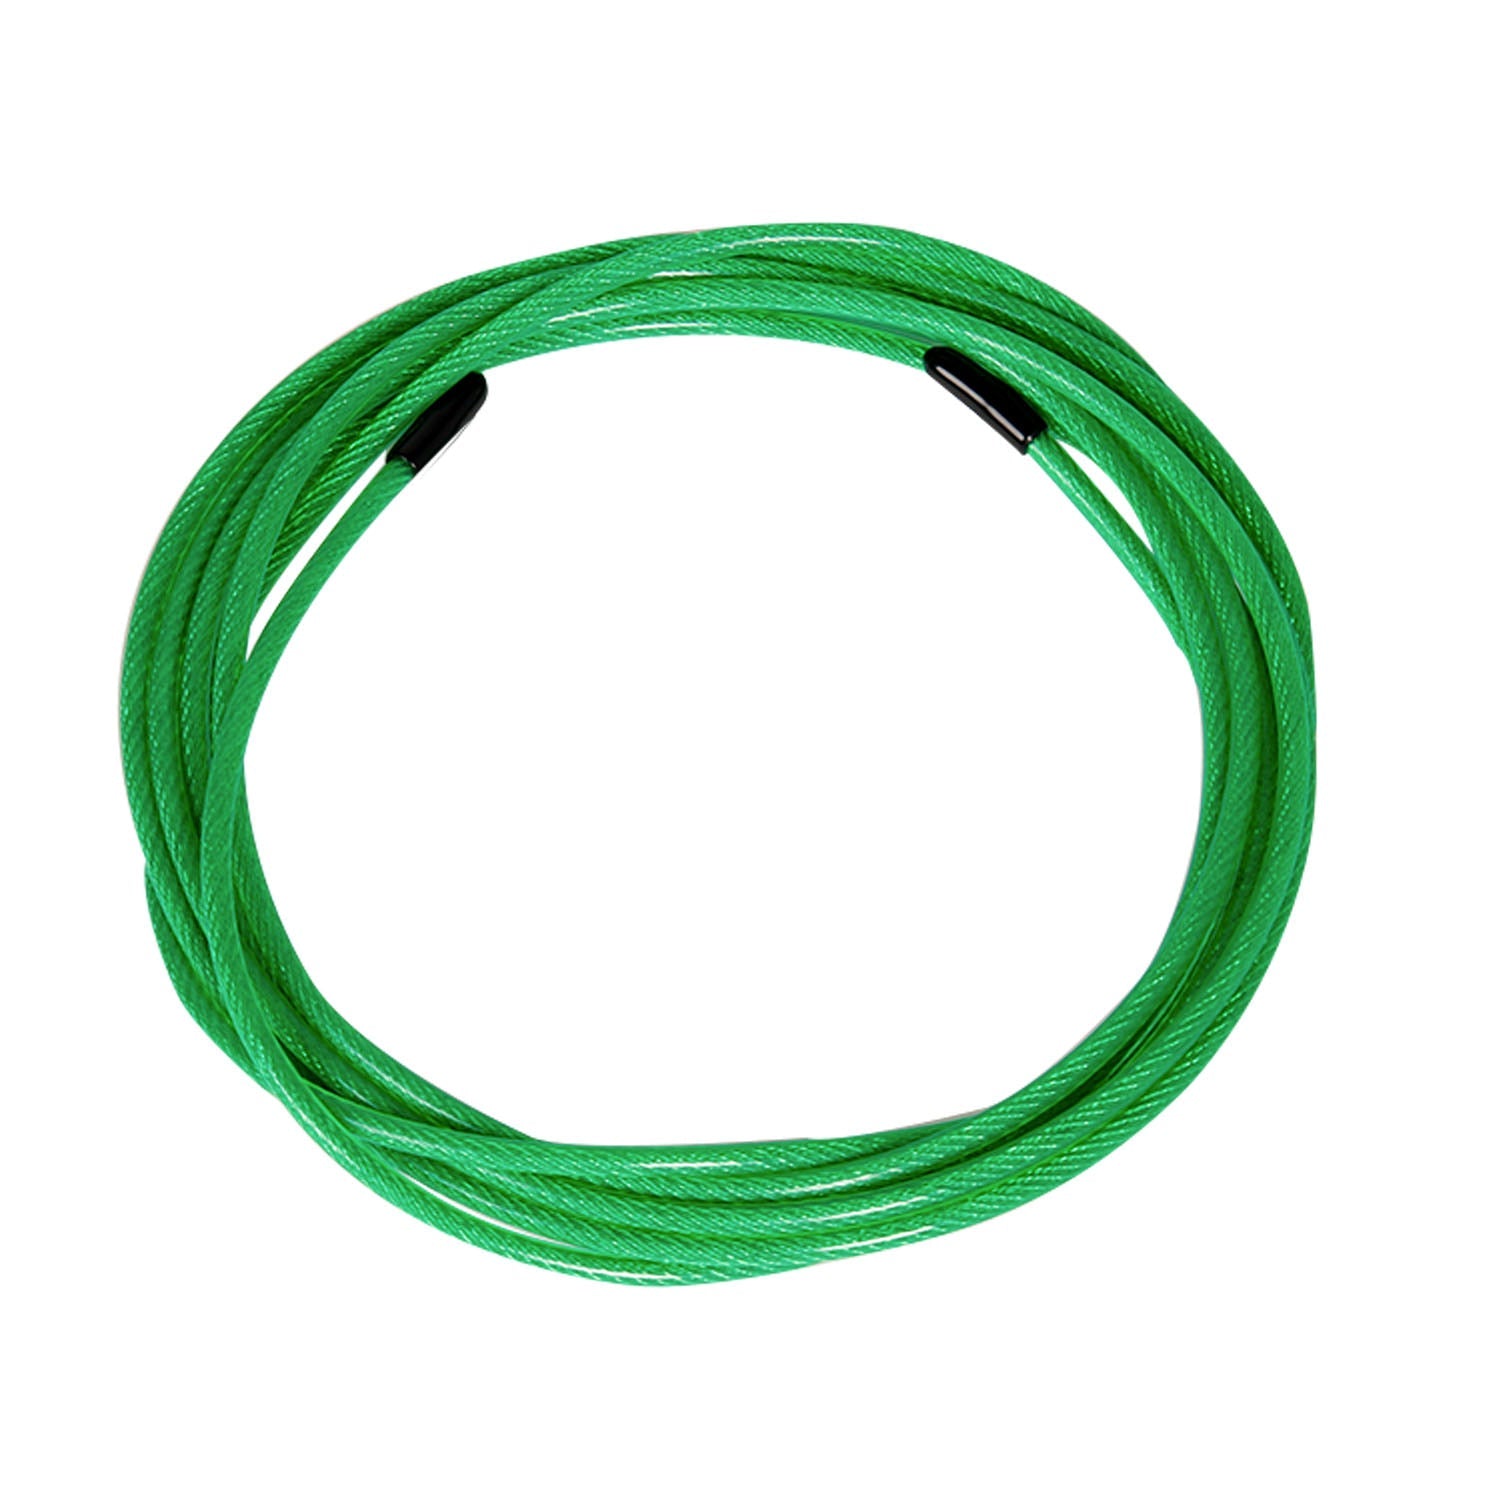 GND SR Skipping Rope Replacement Rope // Green 3.4mm - SR Skipping Rope- GND Fitness